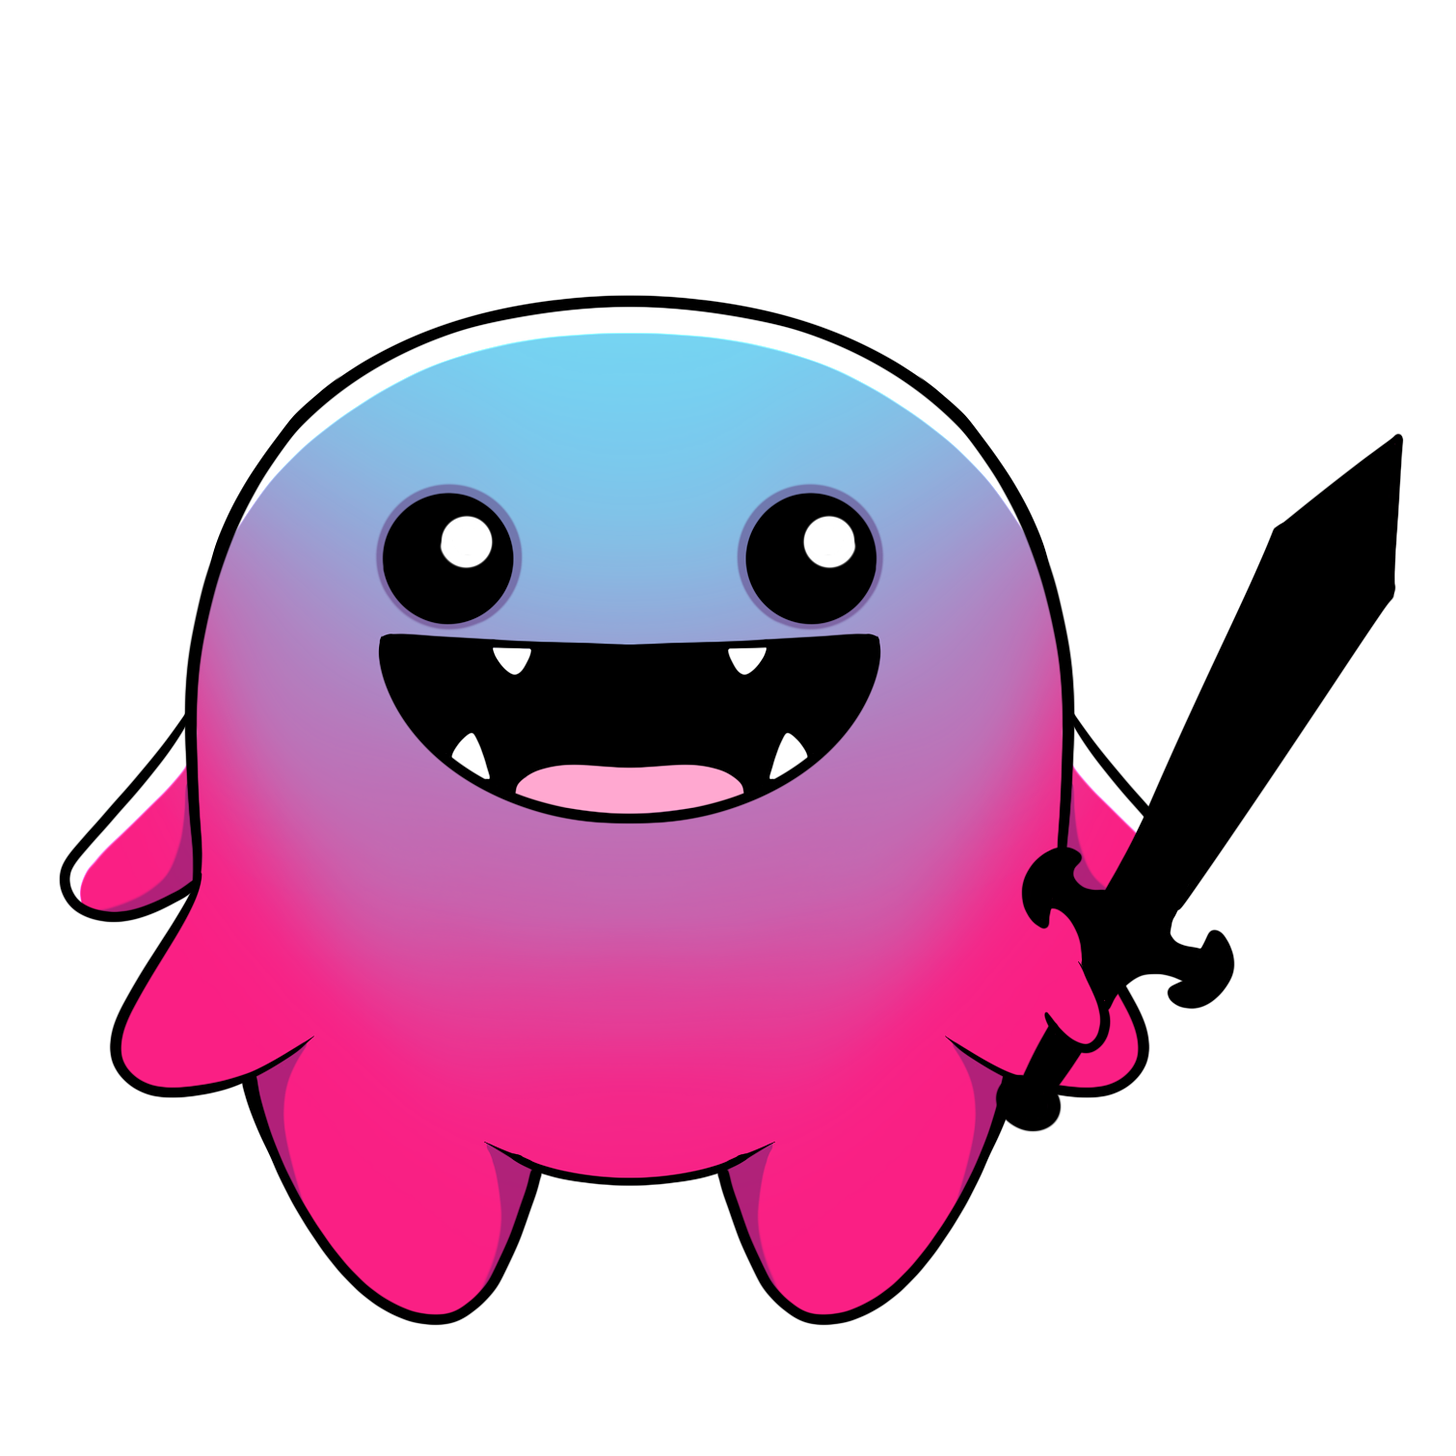 A cute tentacled creature holding a sword with a wide smile.